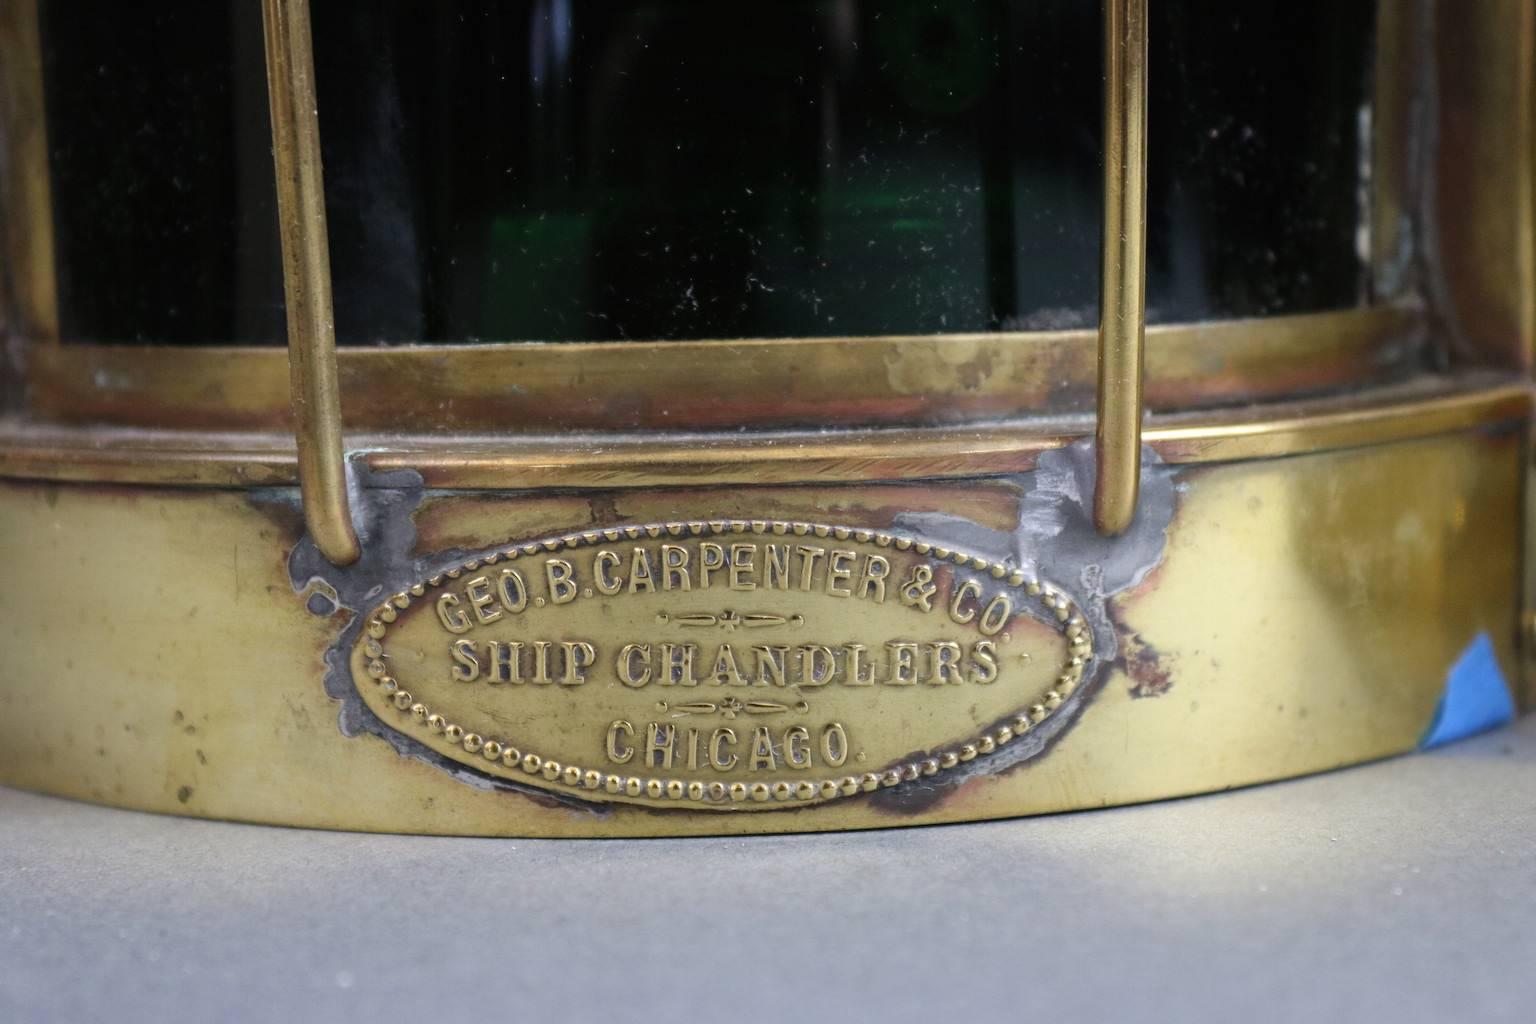 19th century yacht port and starboard lanterns with brass protective bars, vented tops and carry rings. Both with maker's labels from George Carpenter & Co., Ship Chandlers, Chicago. Dimensions: 6.5" L x 5.5" W x 10" H (with or